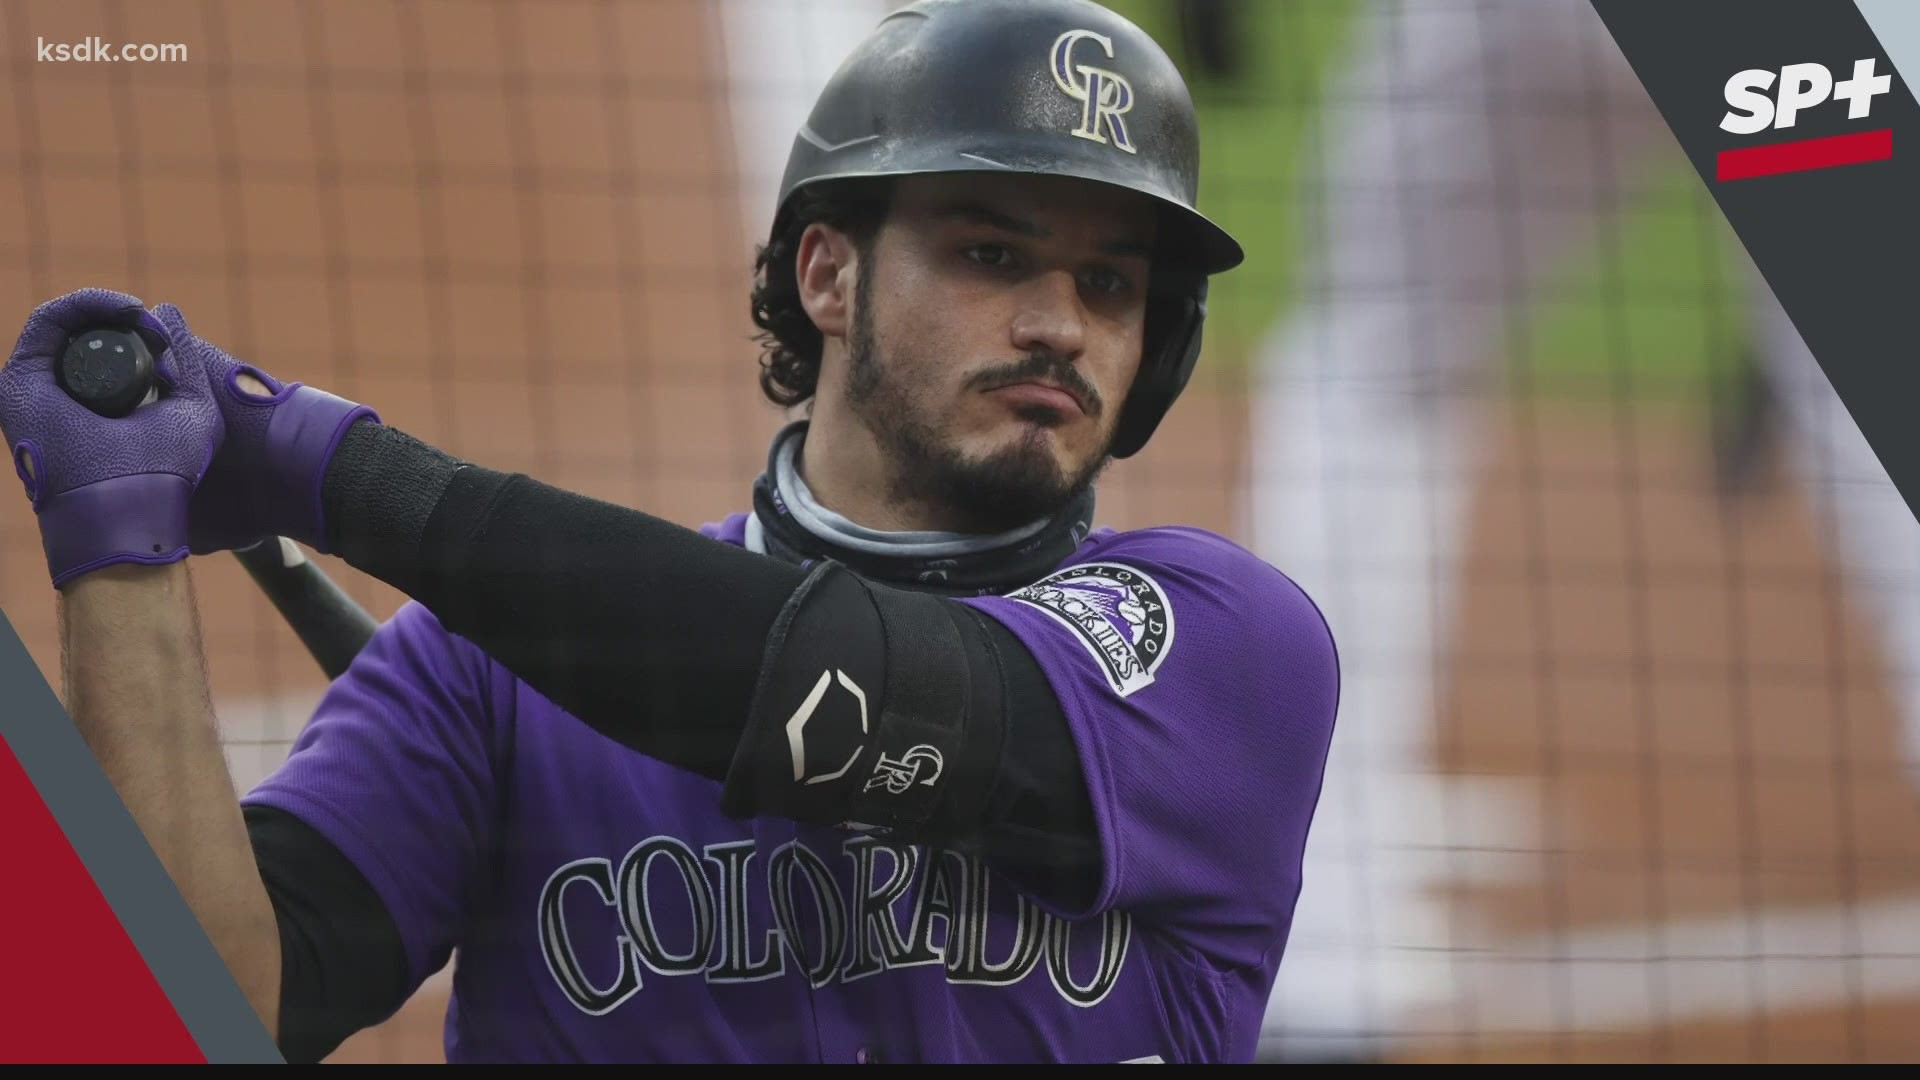 Local experts weigh in on the Cardinals reported trade for Nolan Arenado.